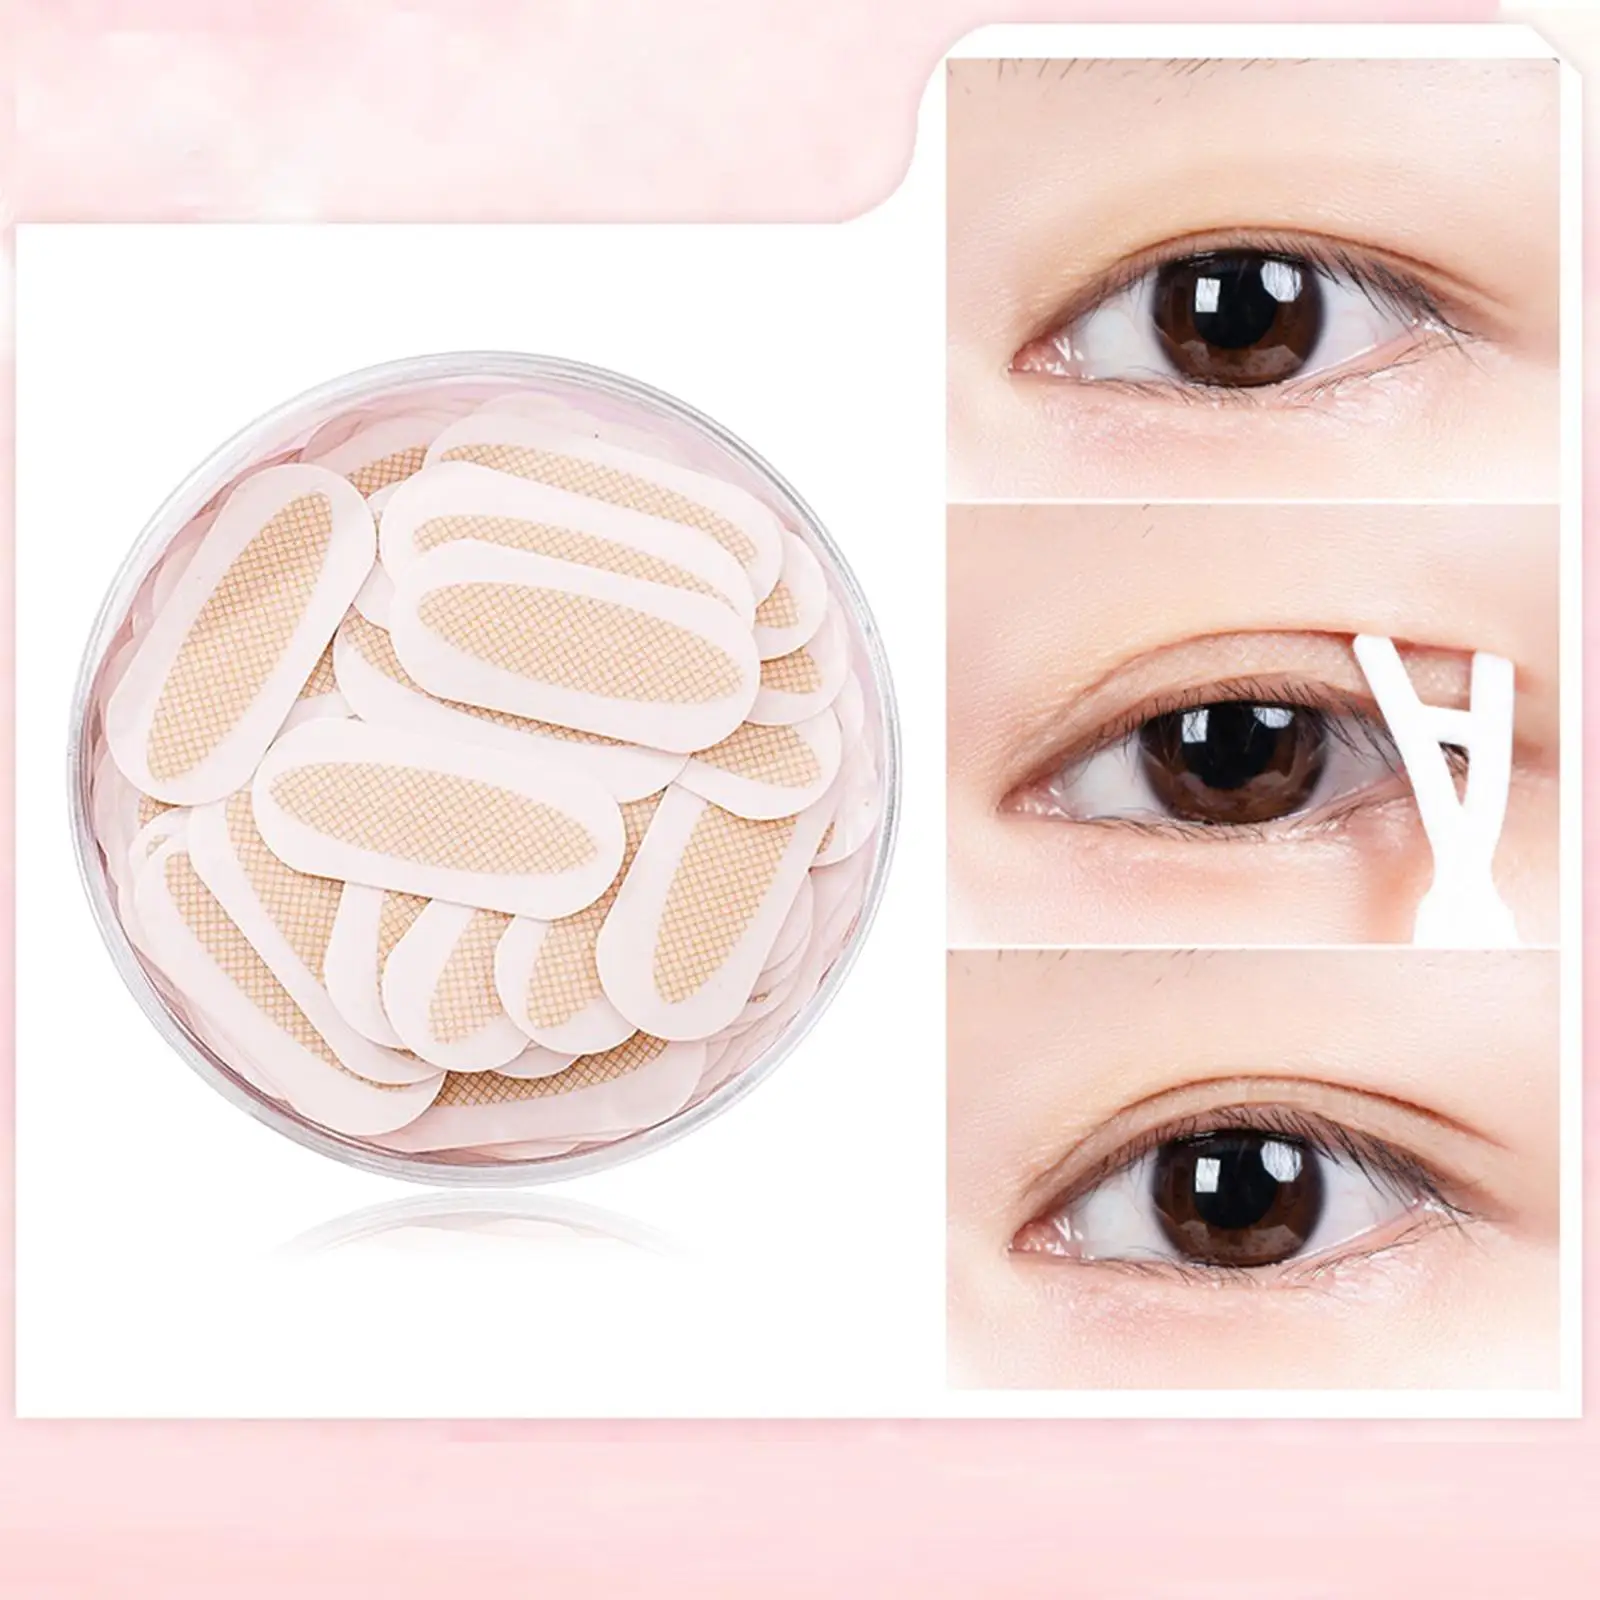 300-In-Pack Invisible Eyelid Stickers Self-Adhesive Breathable Half-Moon Shaped PE Film Eyelid Lift Tape for Eyes Make Up Party